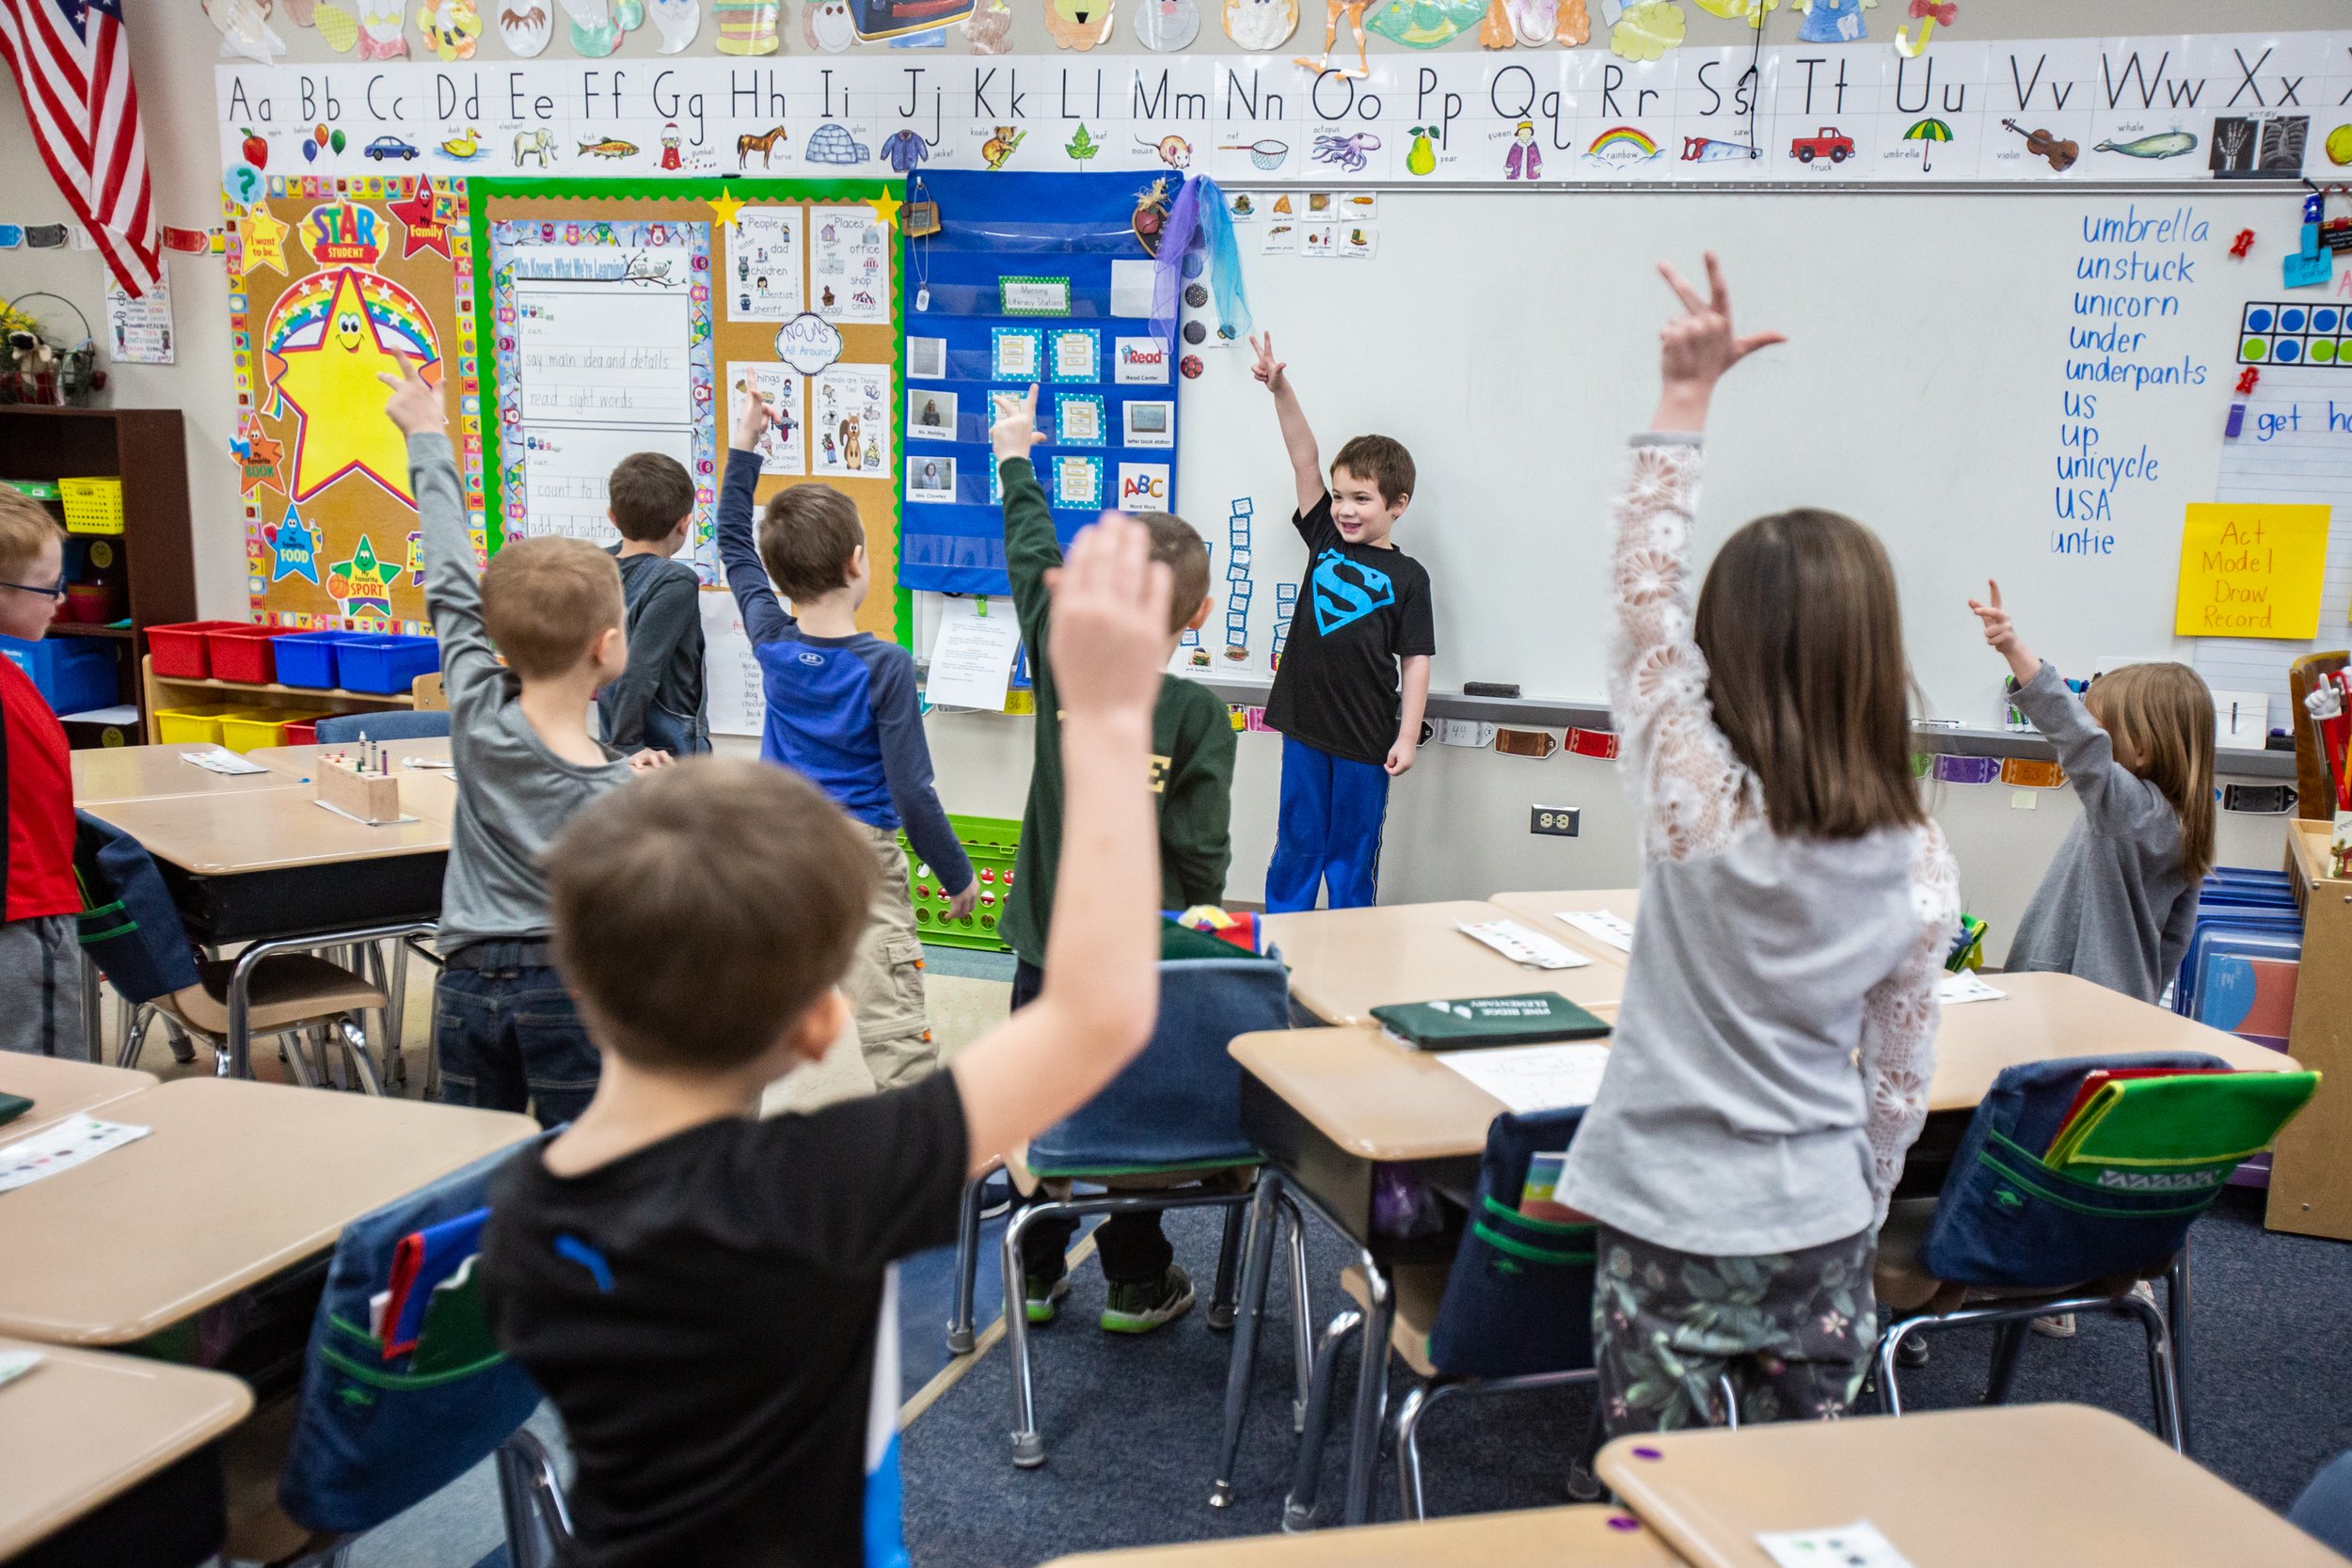  Pine Ridge Elementary kindergartener Coltyn Schultz, center, leads his classmates in an exercise activity to get some energy out at the school on Wednesday, February 12, 2020.   